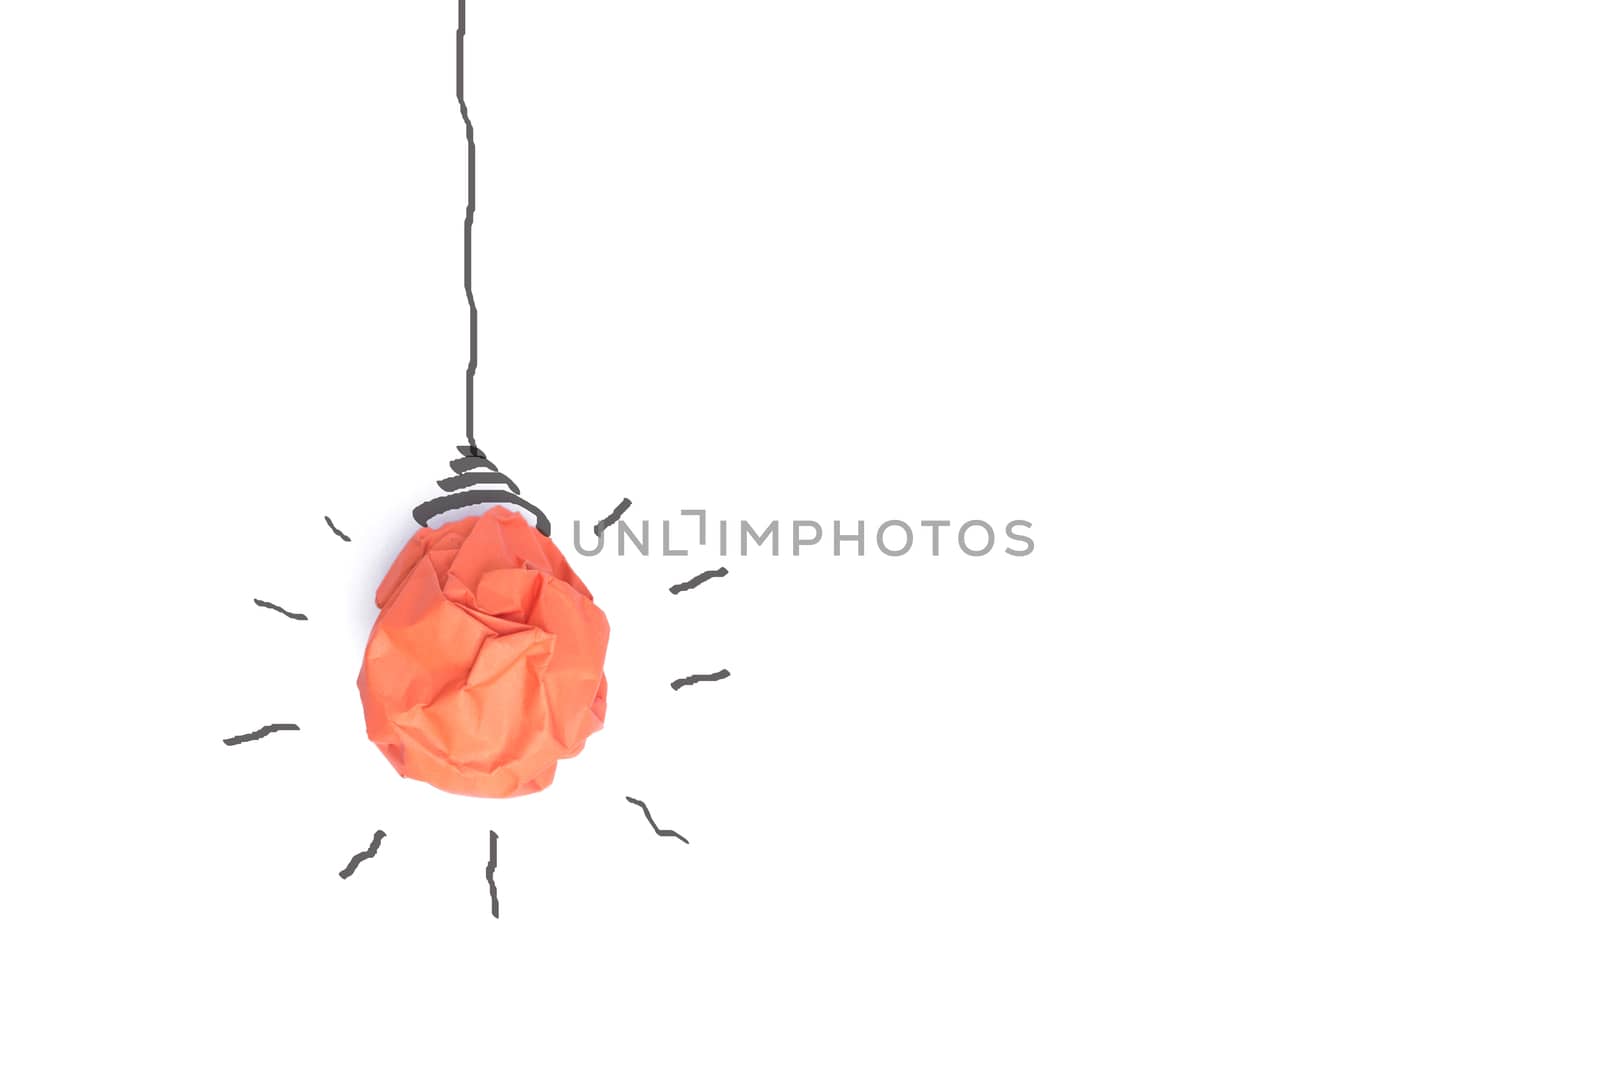 Concept idea with paper light bulb isolate on white background